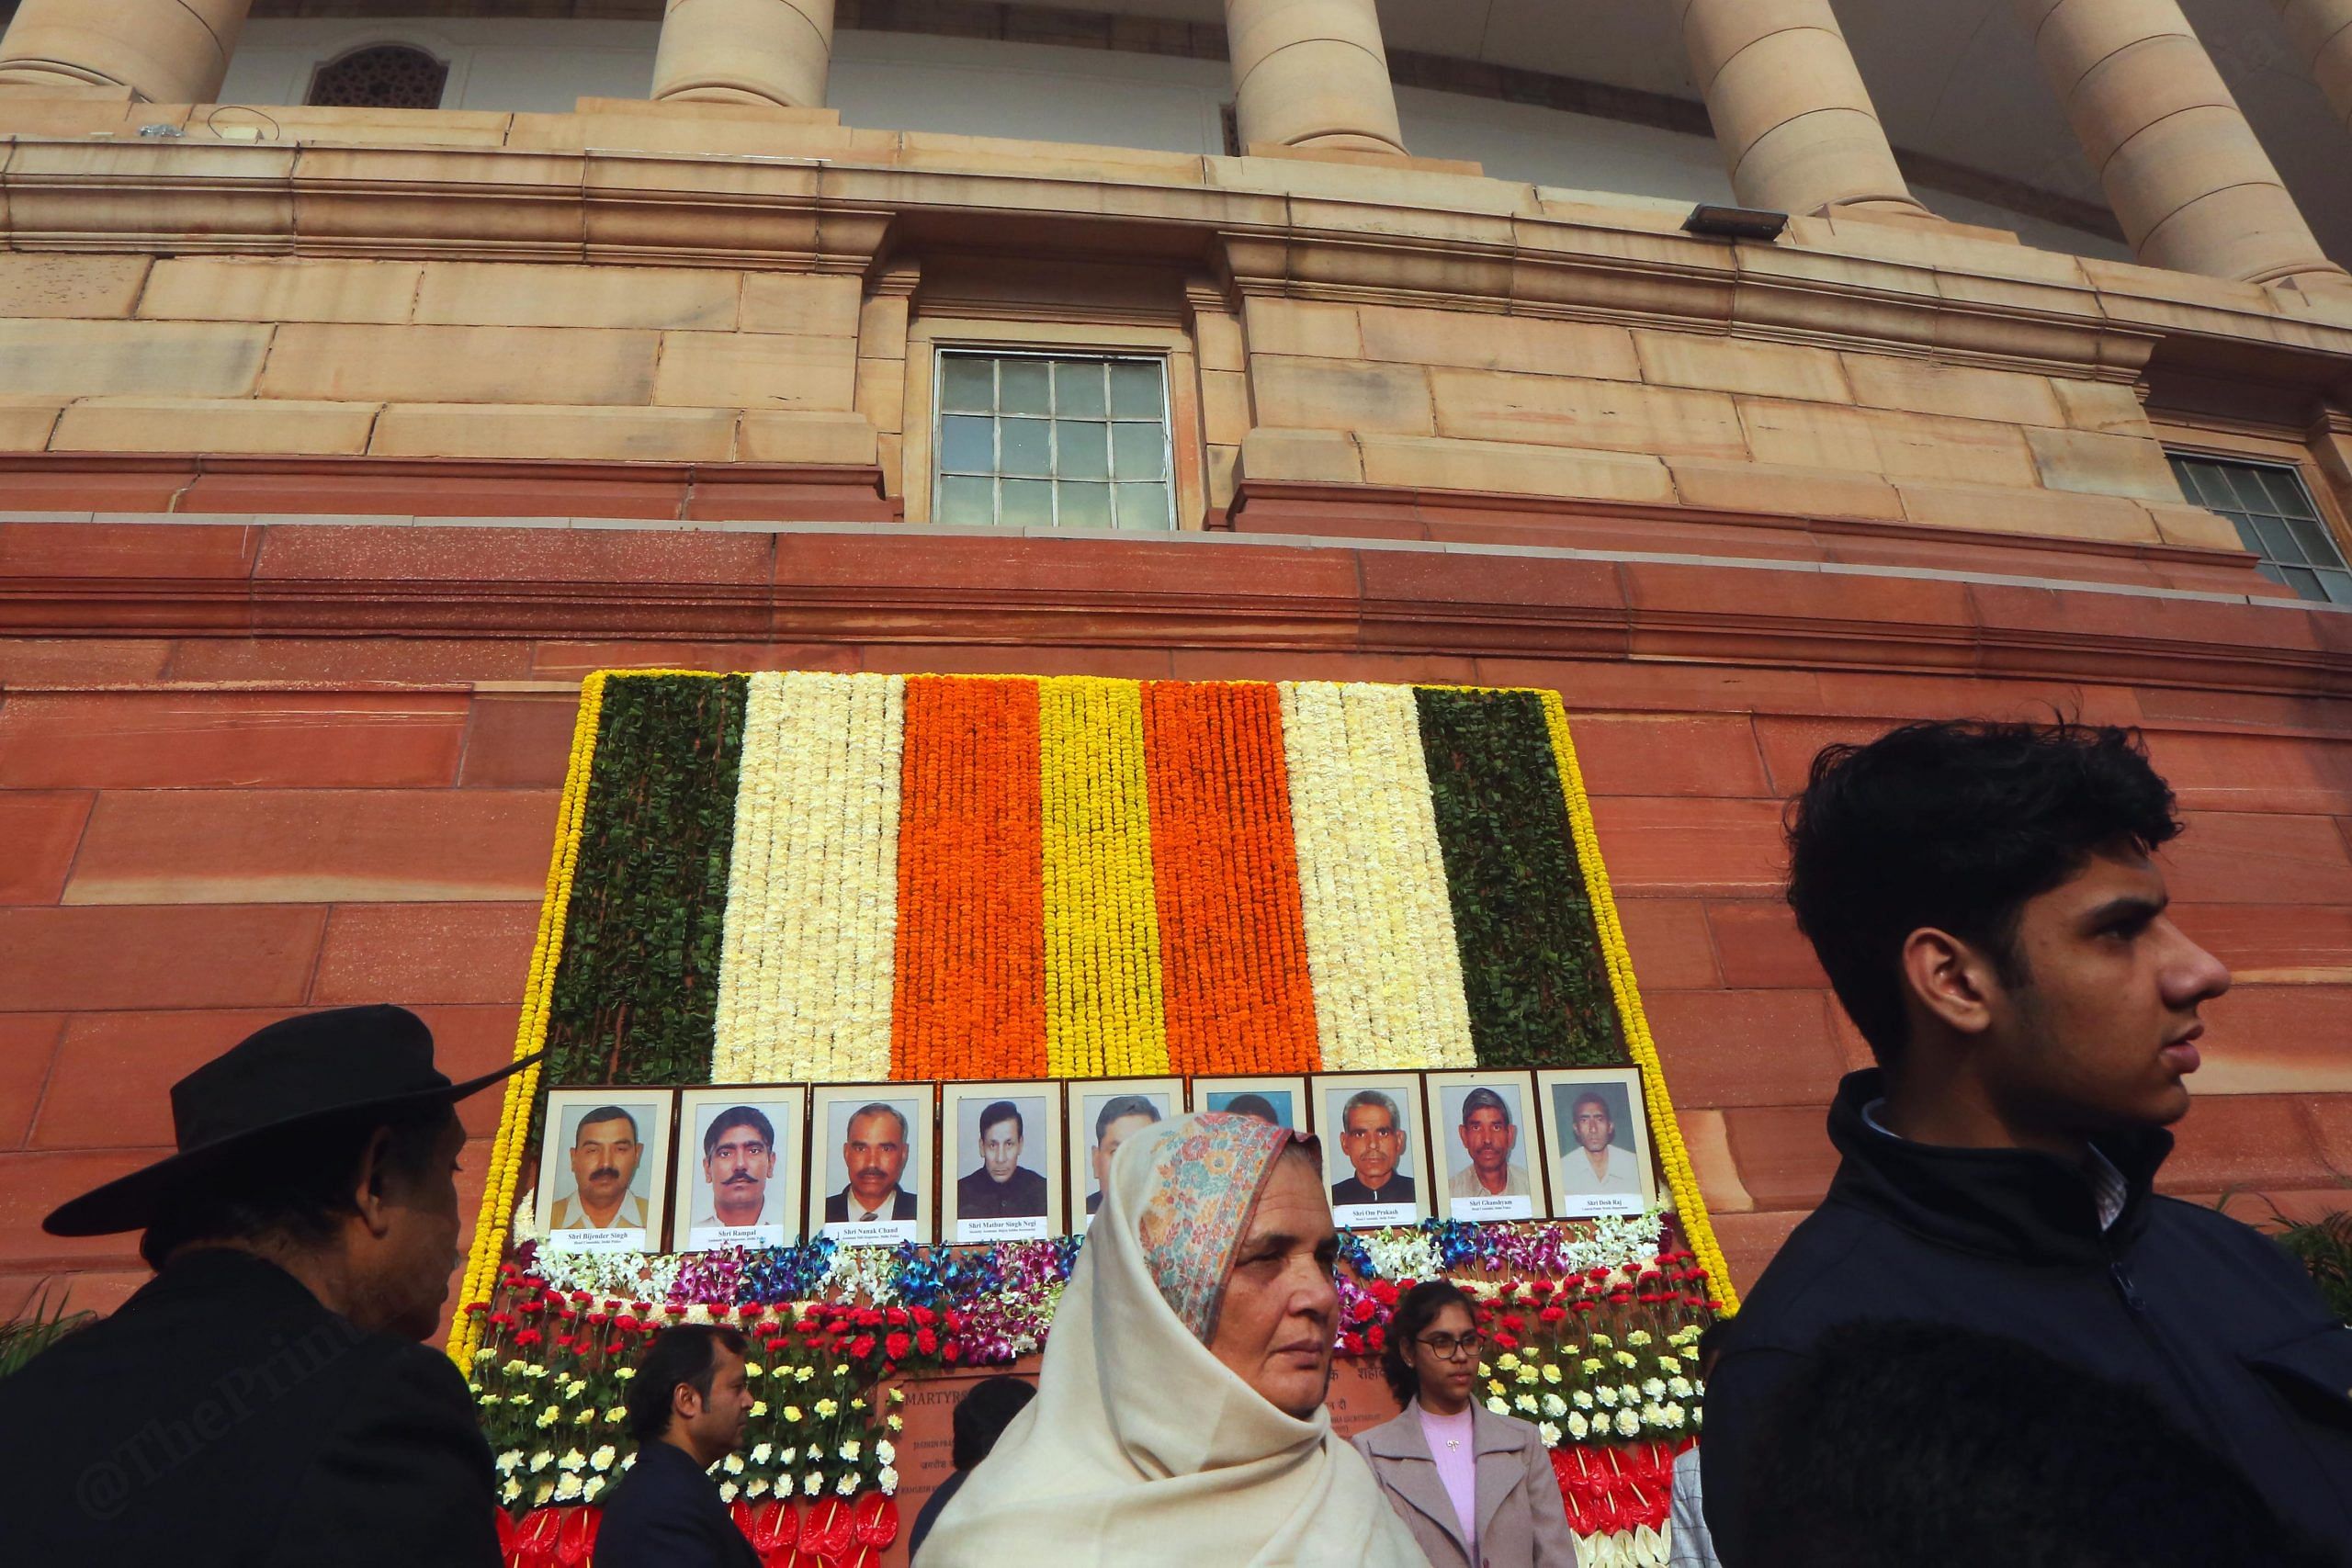 Family members of martyrs paid tributes to their loved ones, who lost their lives in the 2001 Parliament attack, during a tribute ceremony at the Samvidhan Sadan | Praveen Jain | ThePrint